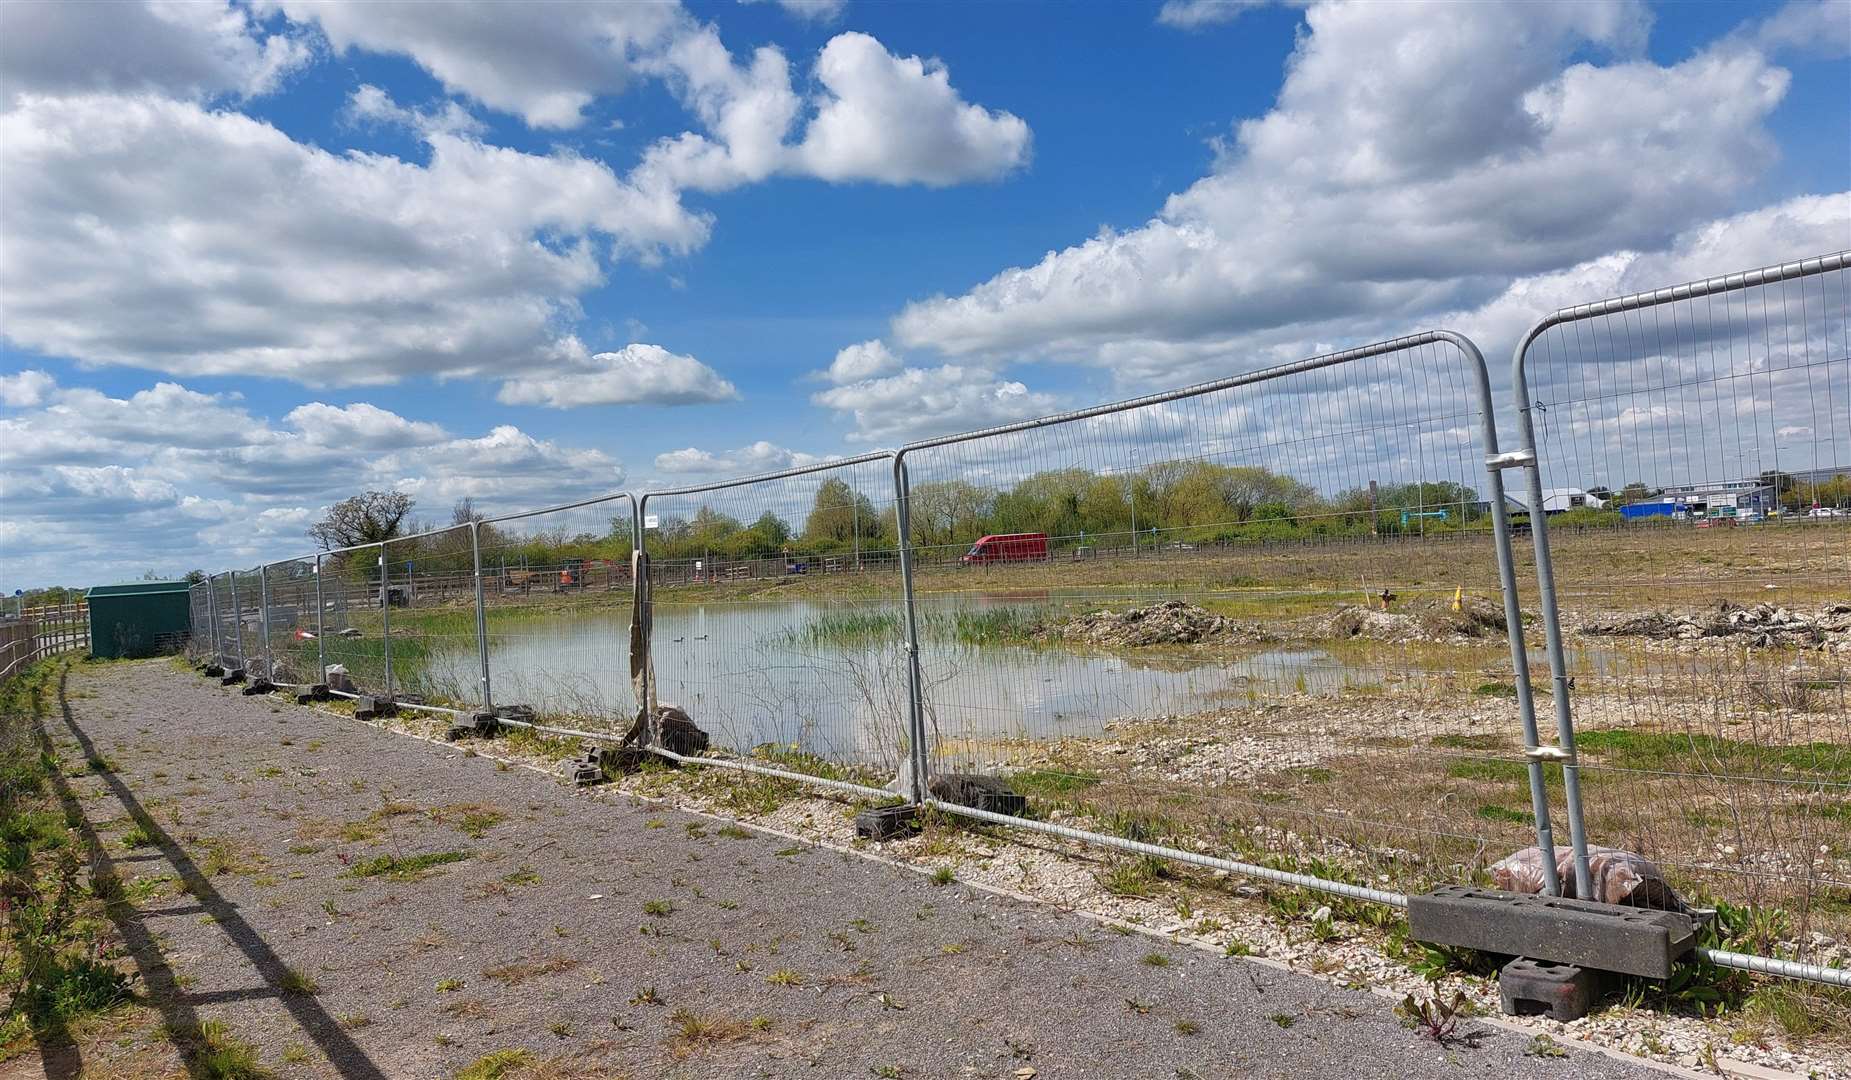 Questions have been raised over how the development will impact a pond on the site